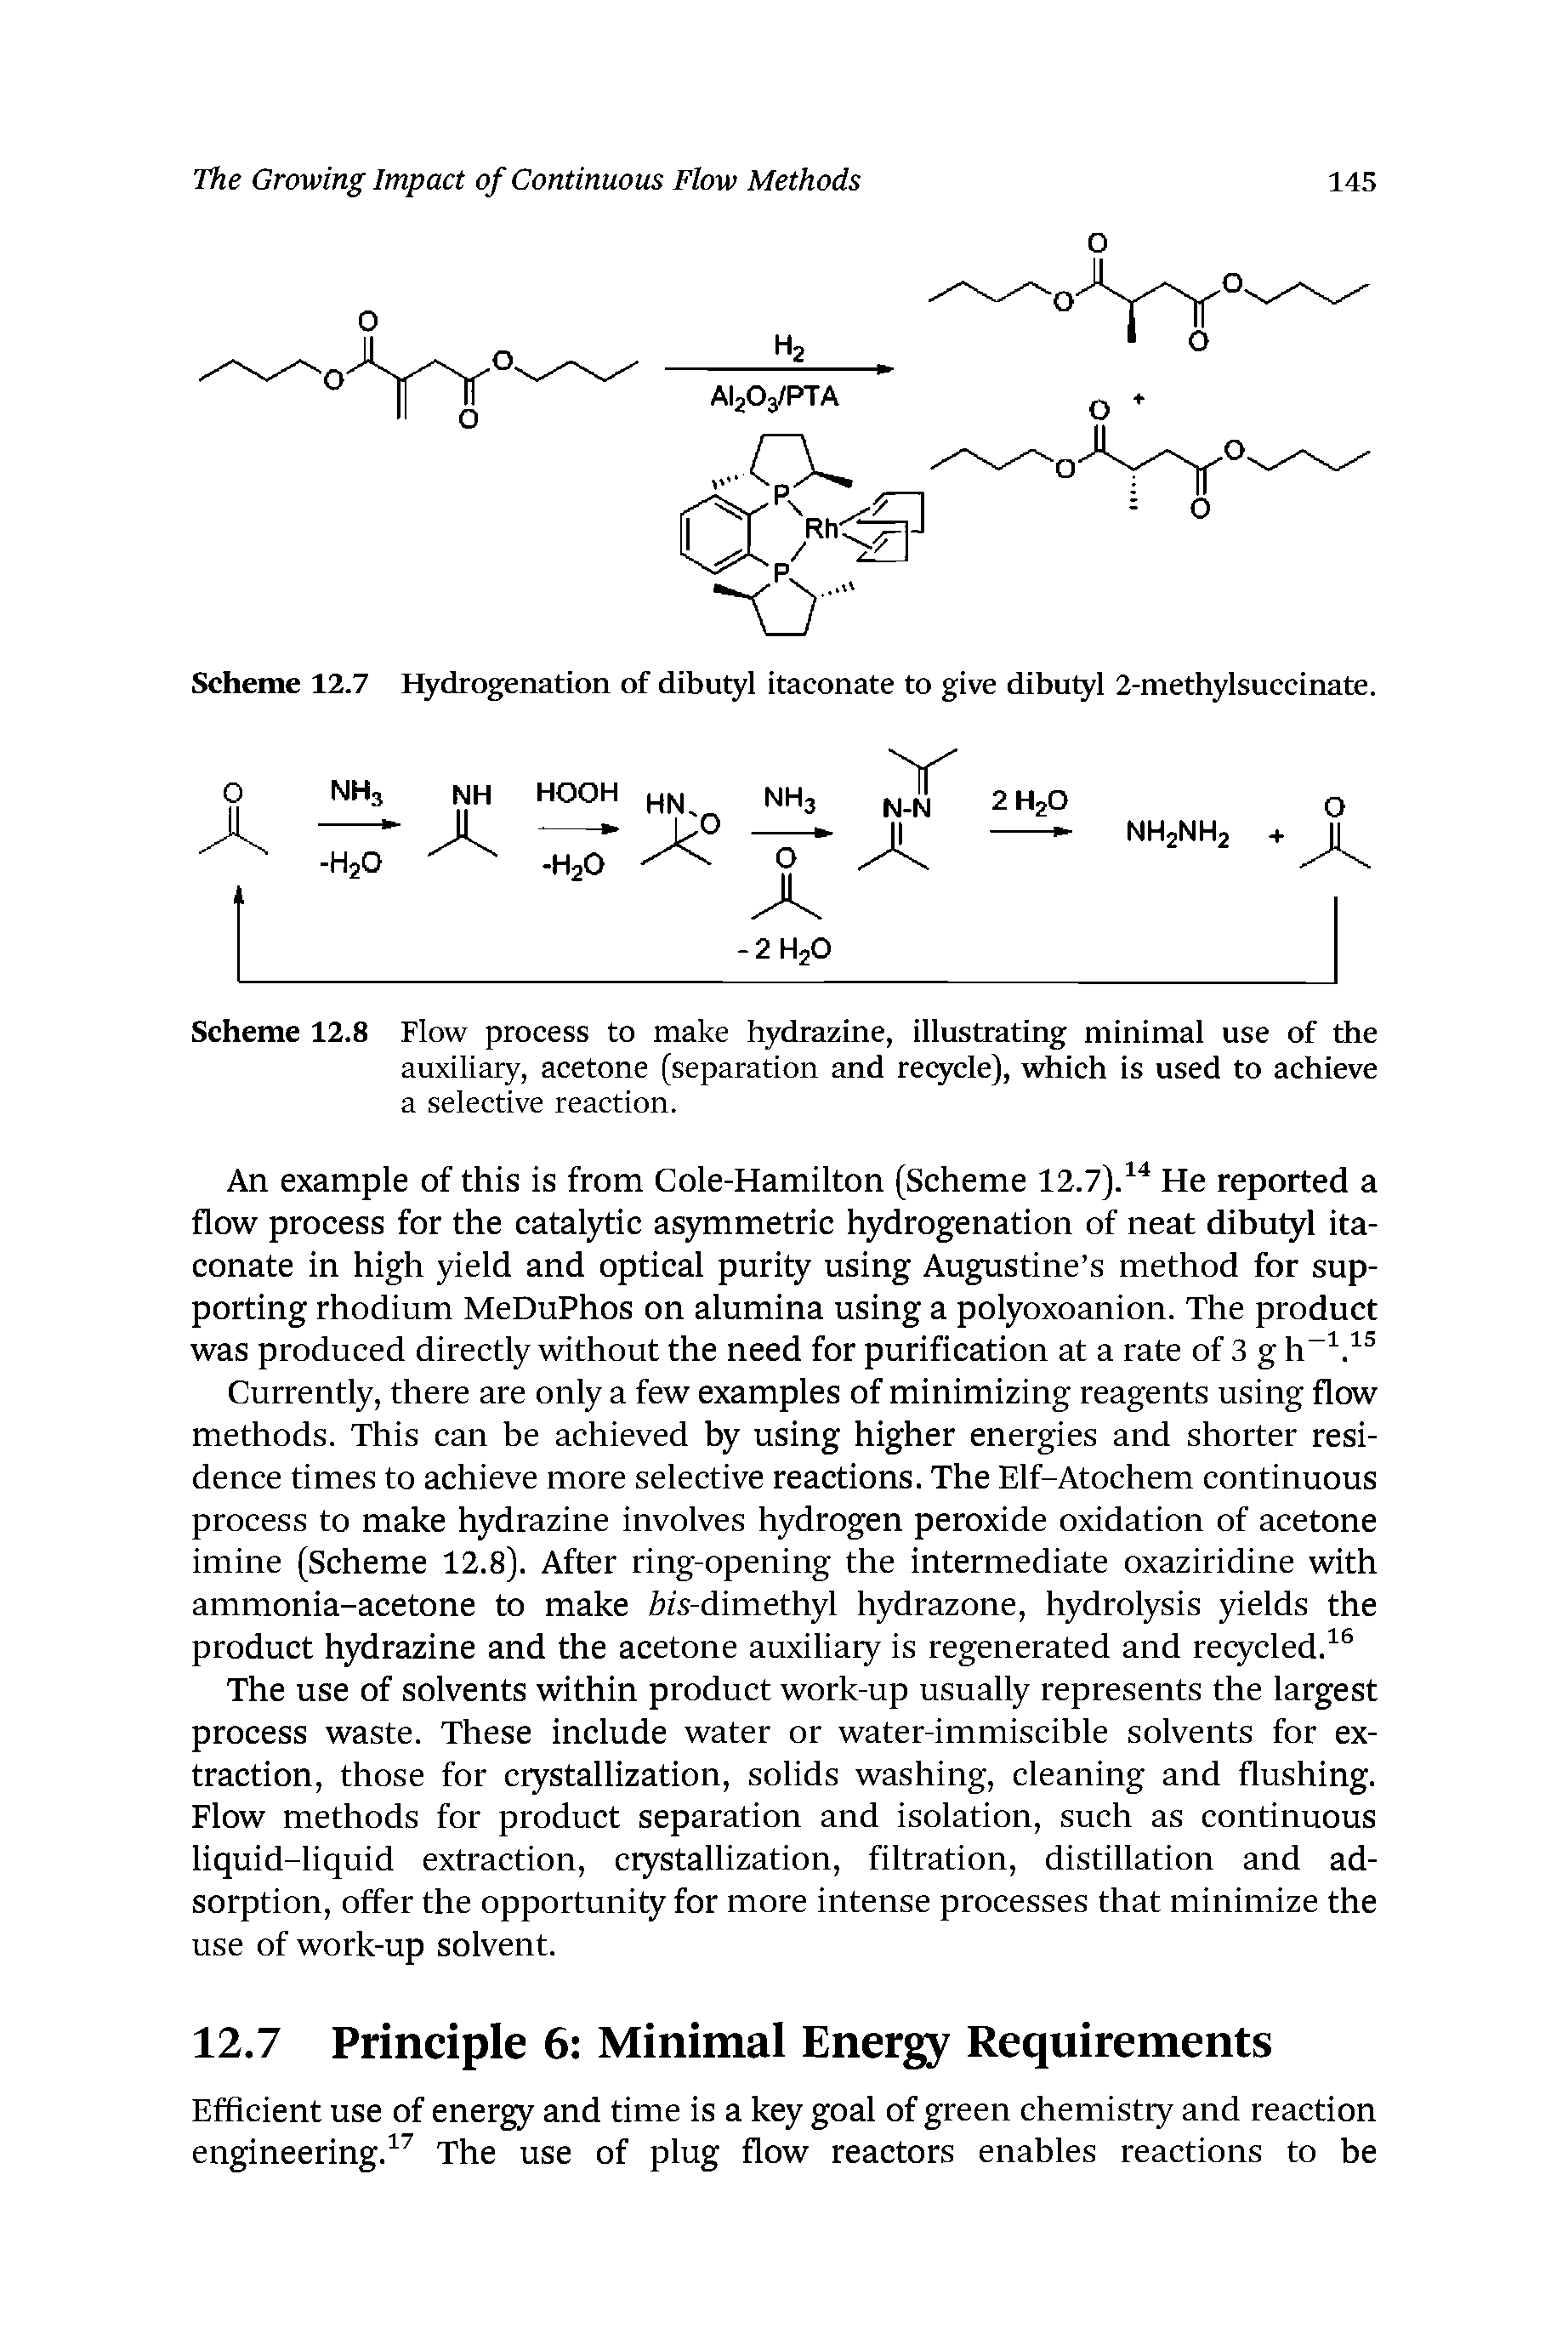 Scheme 12.8 Flow process to make hydrazine, illustrating minimal use of the auxiliary, acetone (separation and recyele), which is used to achieve...